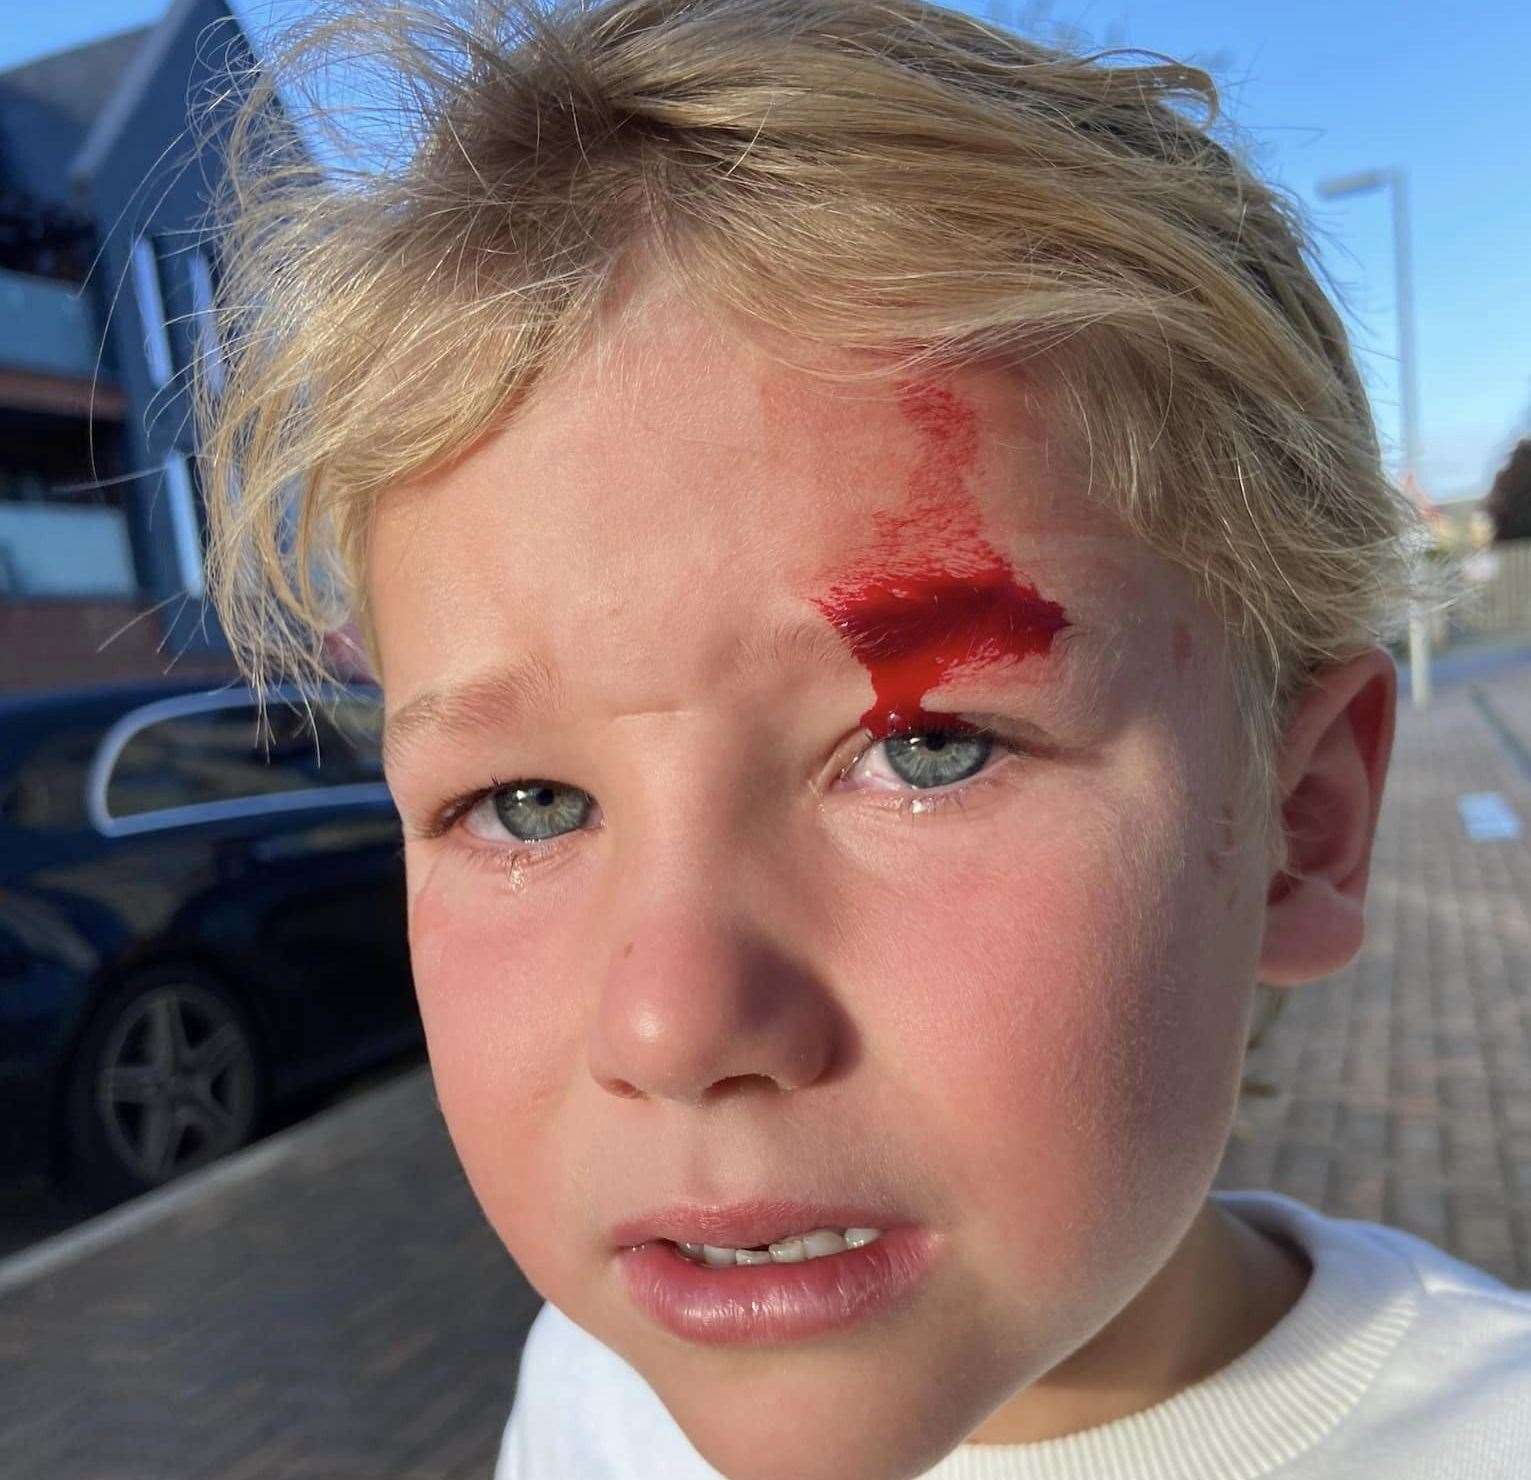 Miss Howes' five-year-old son Georgie was left in tears after running into an exposed screw in a fence in Repton Park in Ashford. Picture: Sophie Howes